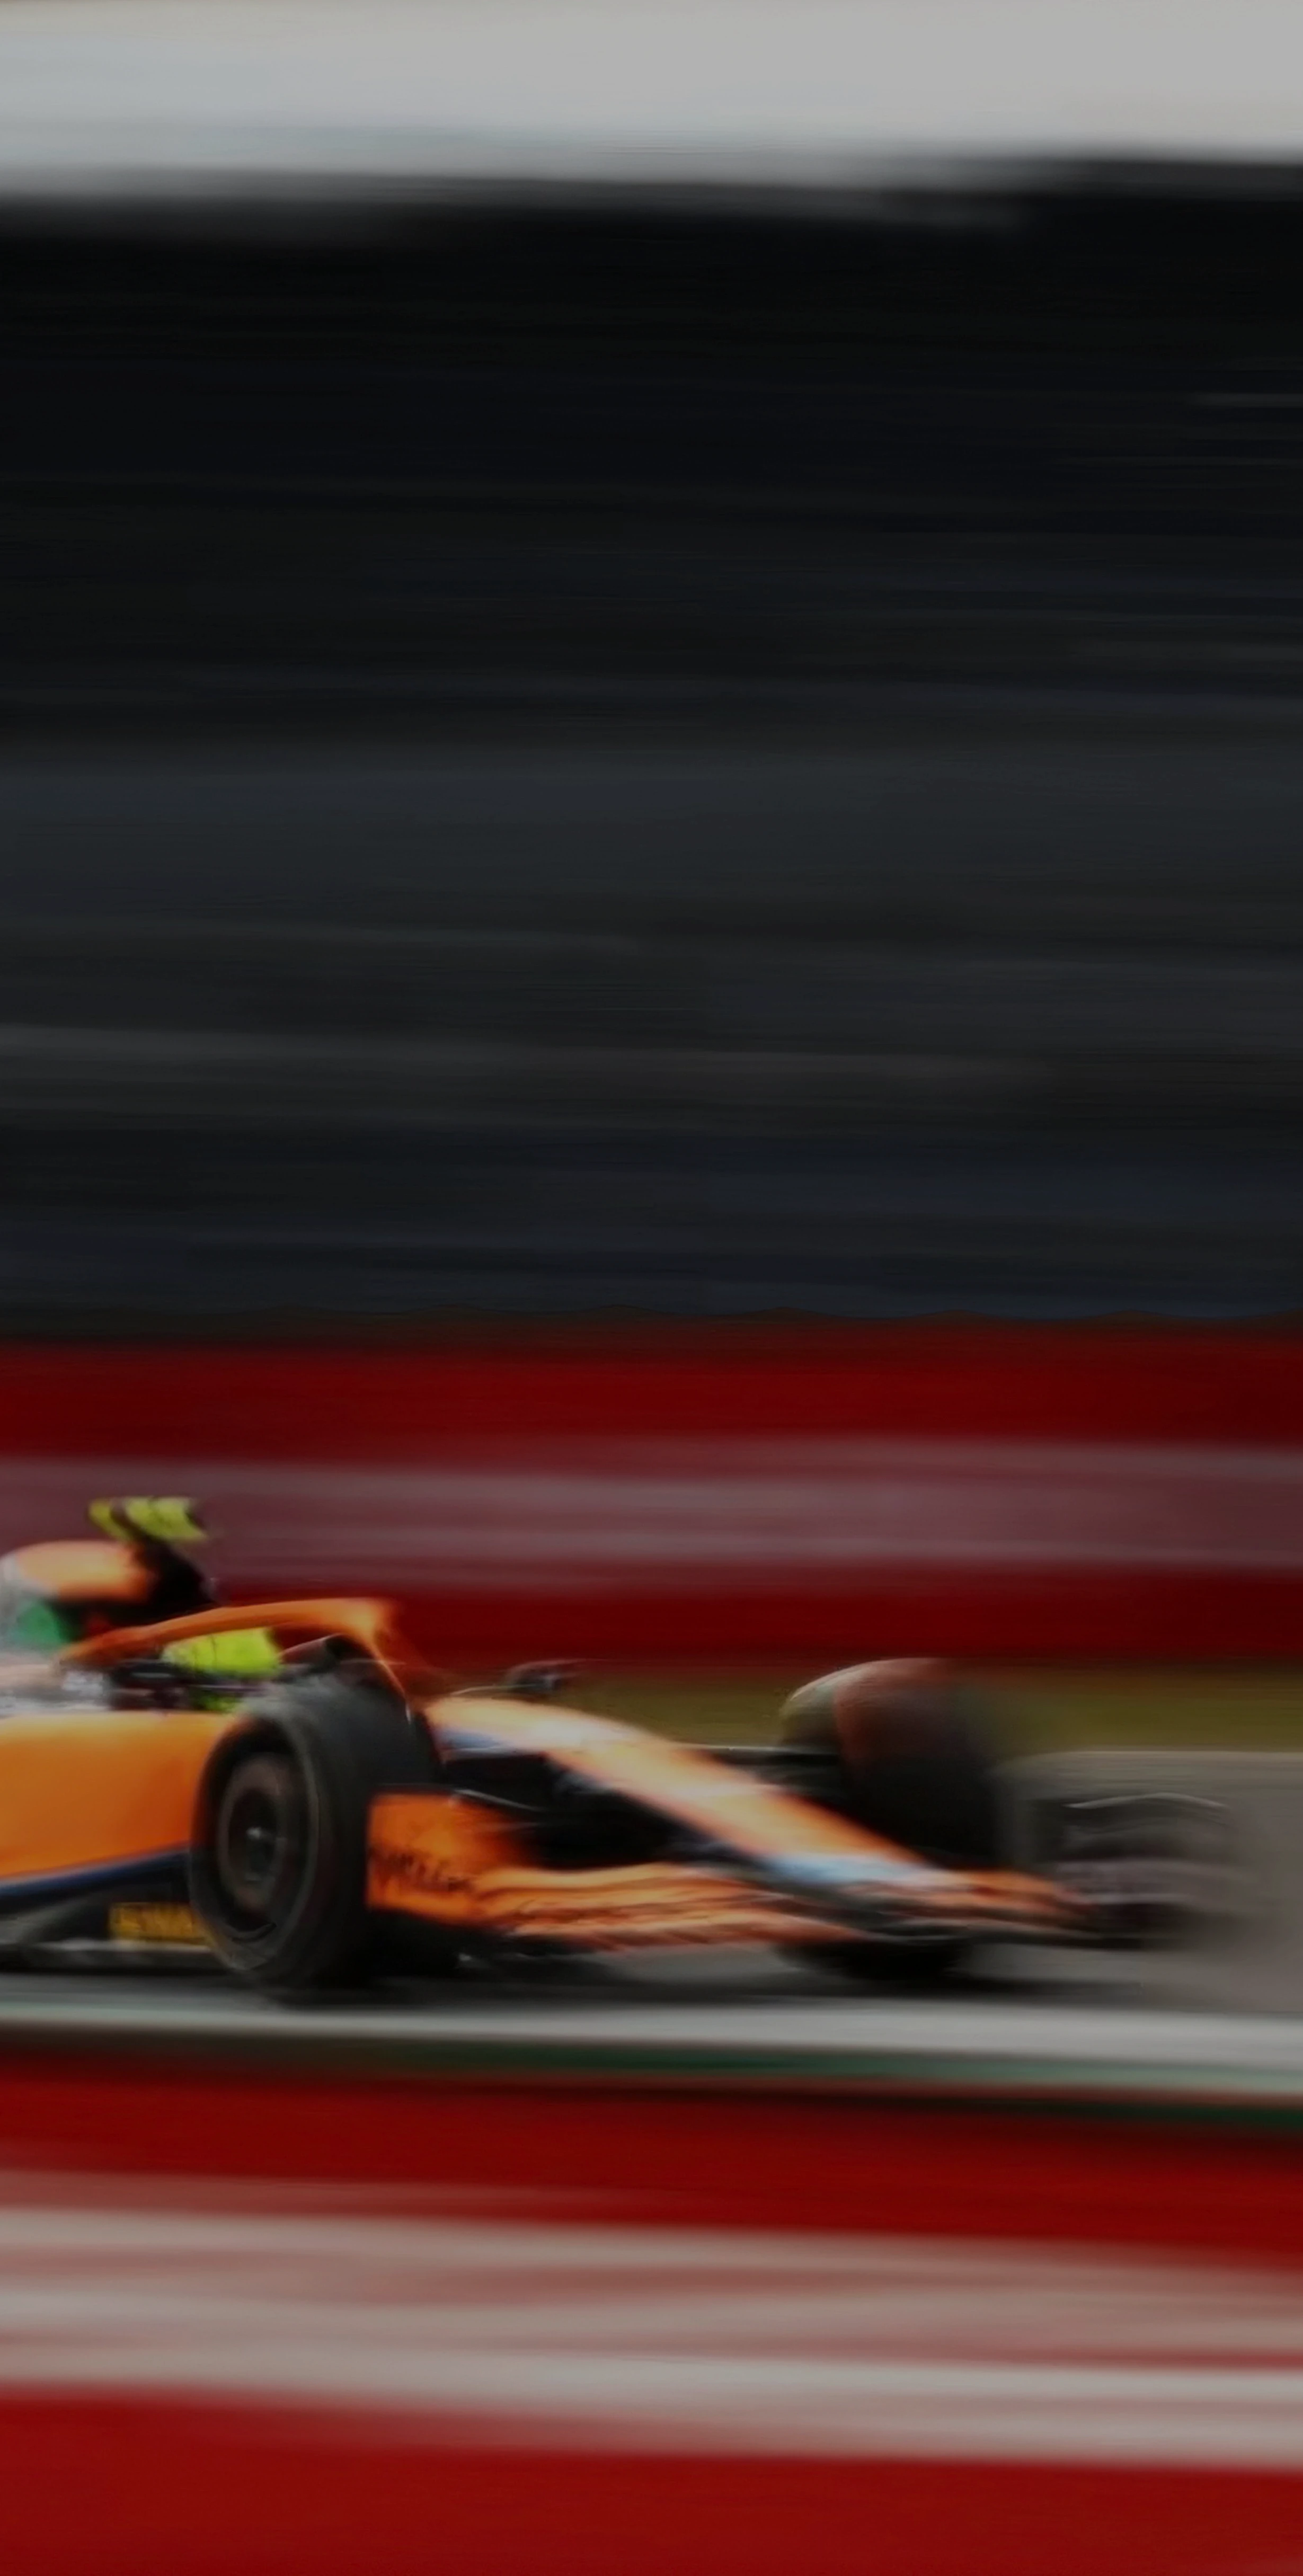 An image of a fast moving racing car blurring past at high speed at a Formula 1 racing event.